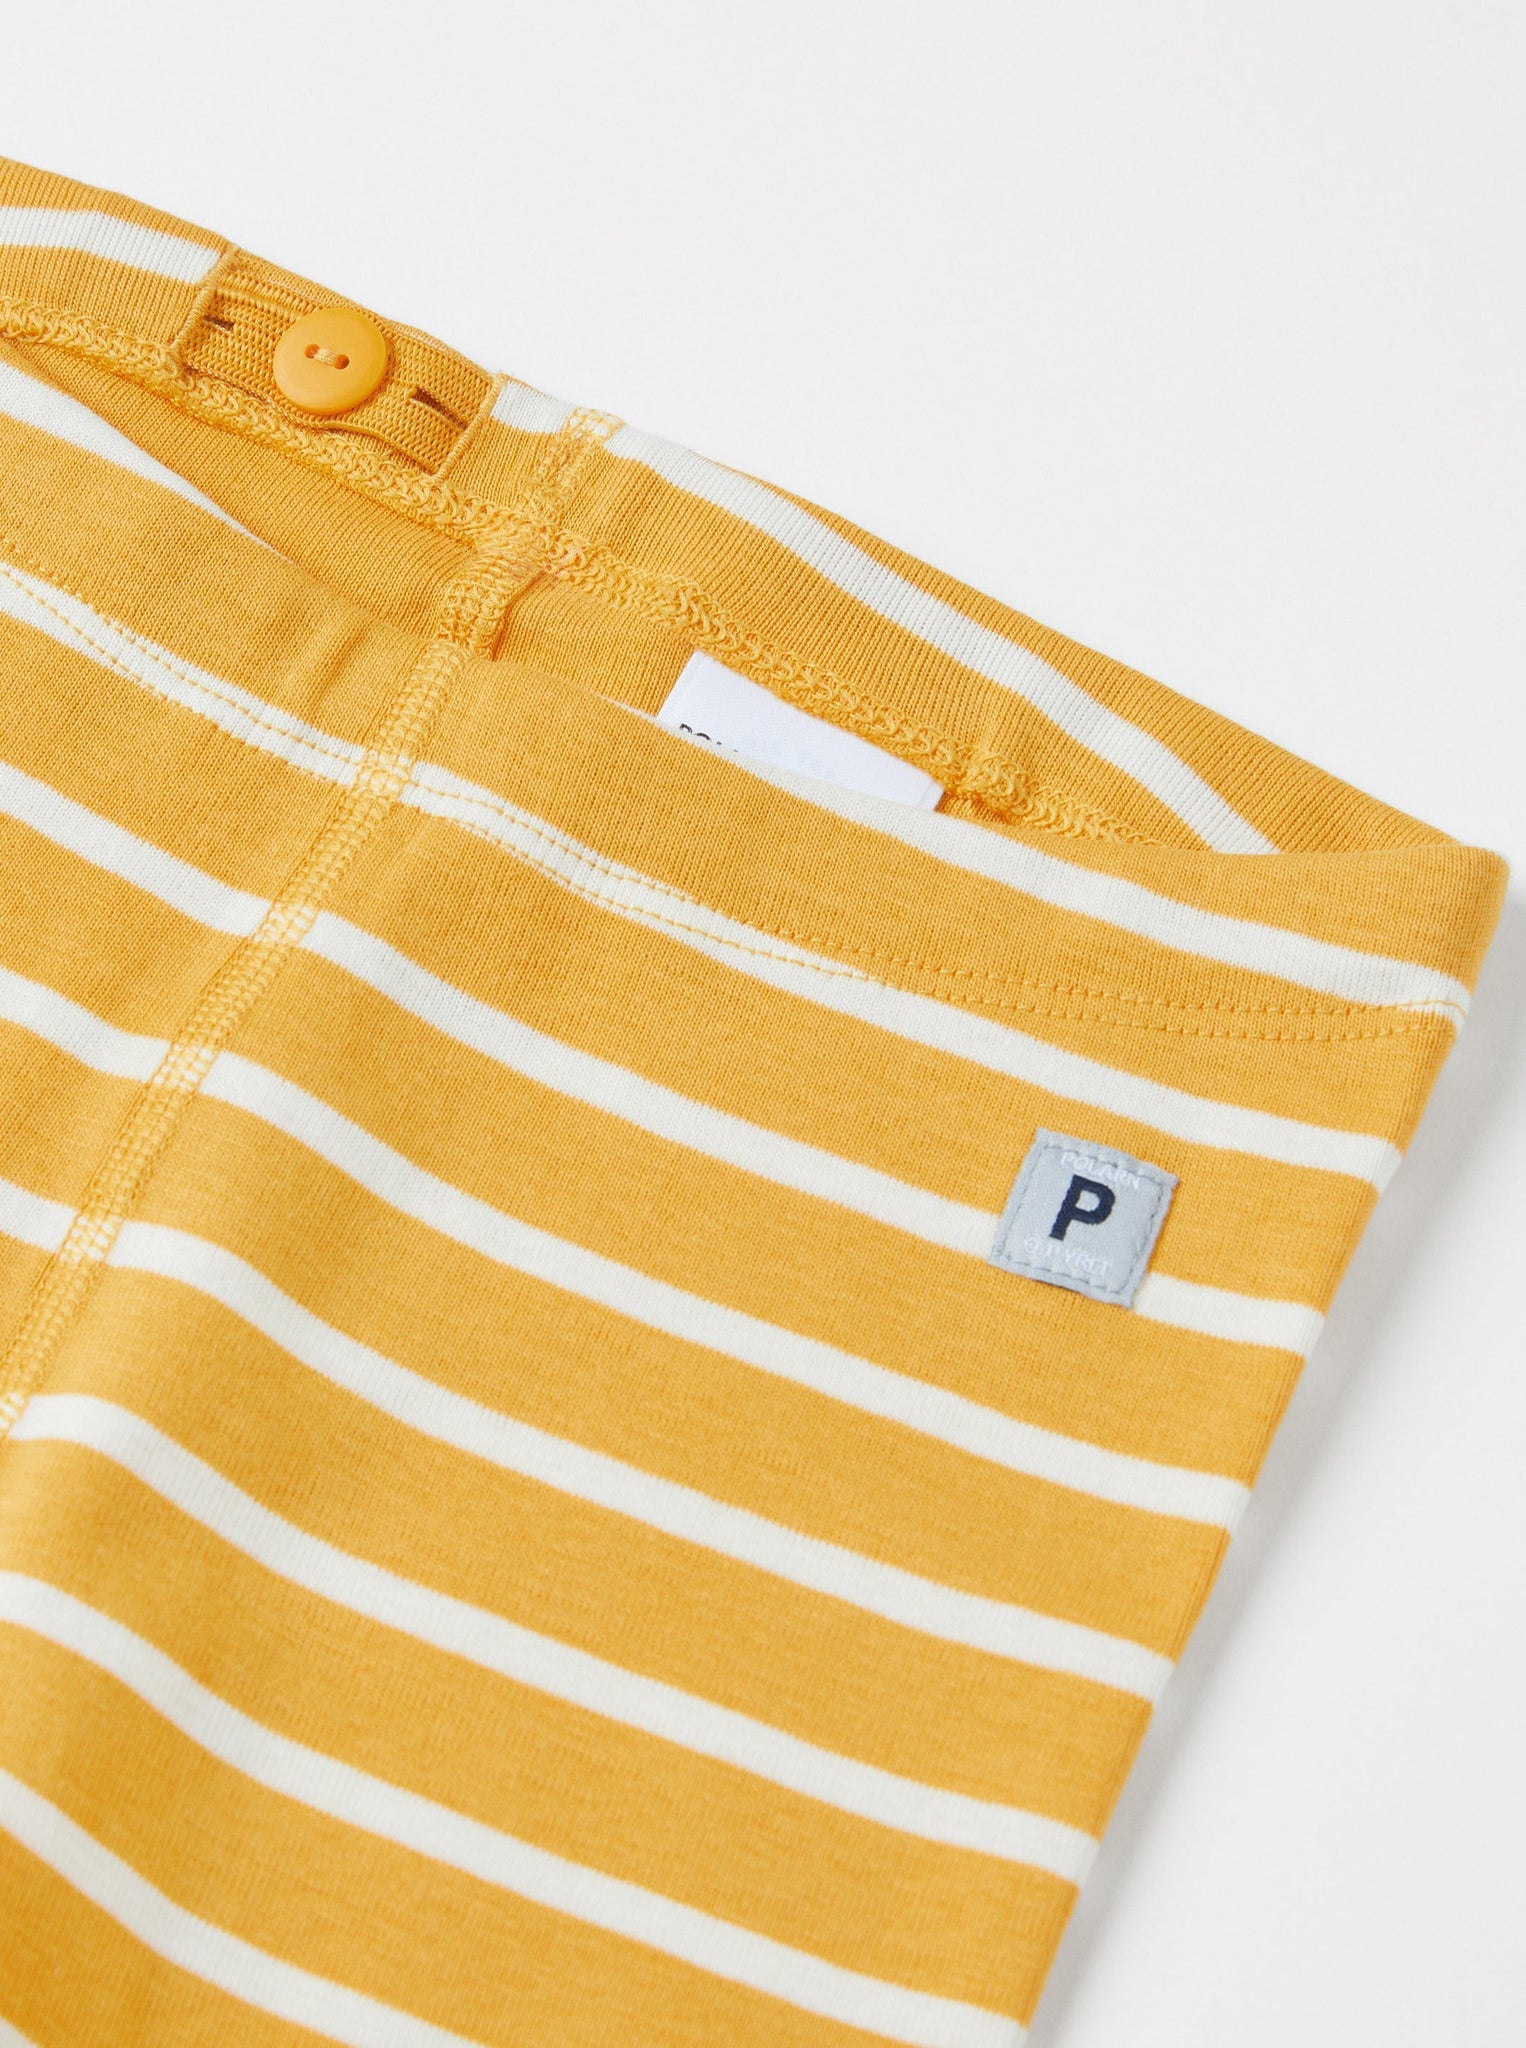 Organic Cotton Yellow Baby Leggings from the Polarn O. Pyret babywear collection. Clothes made using sustainably sourced materials.